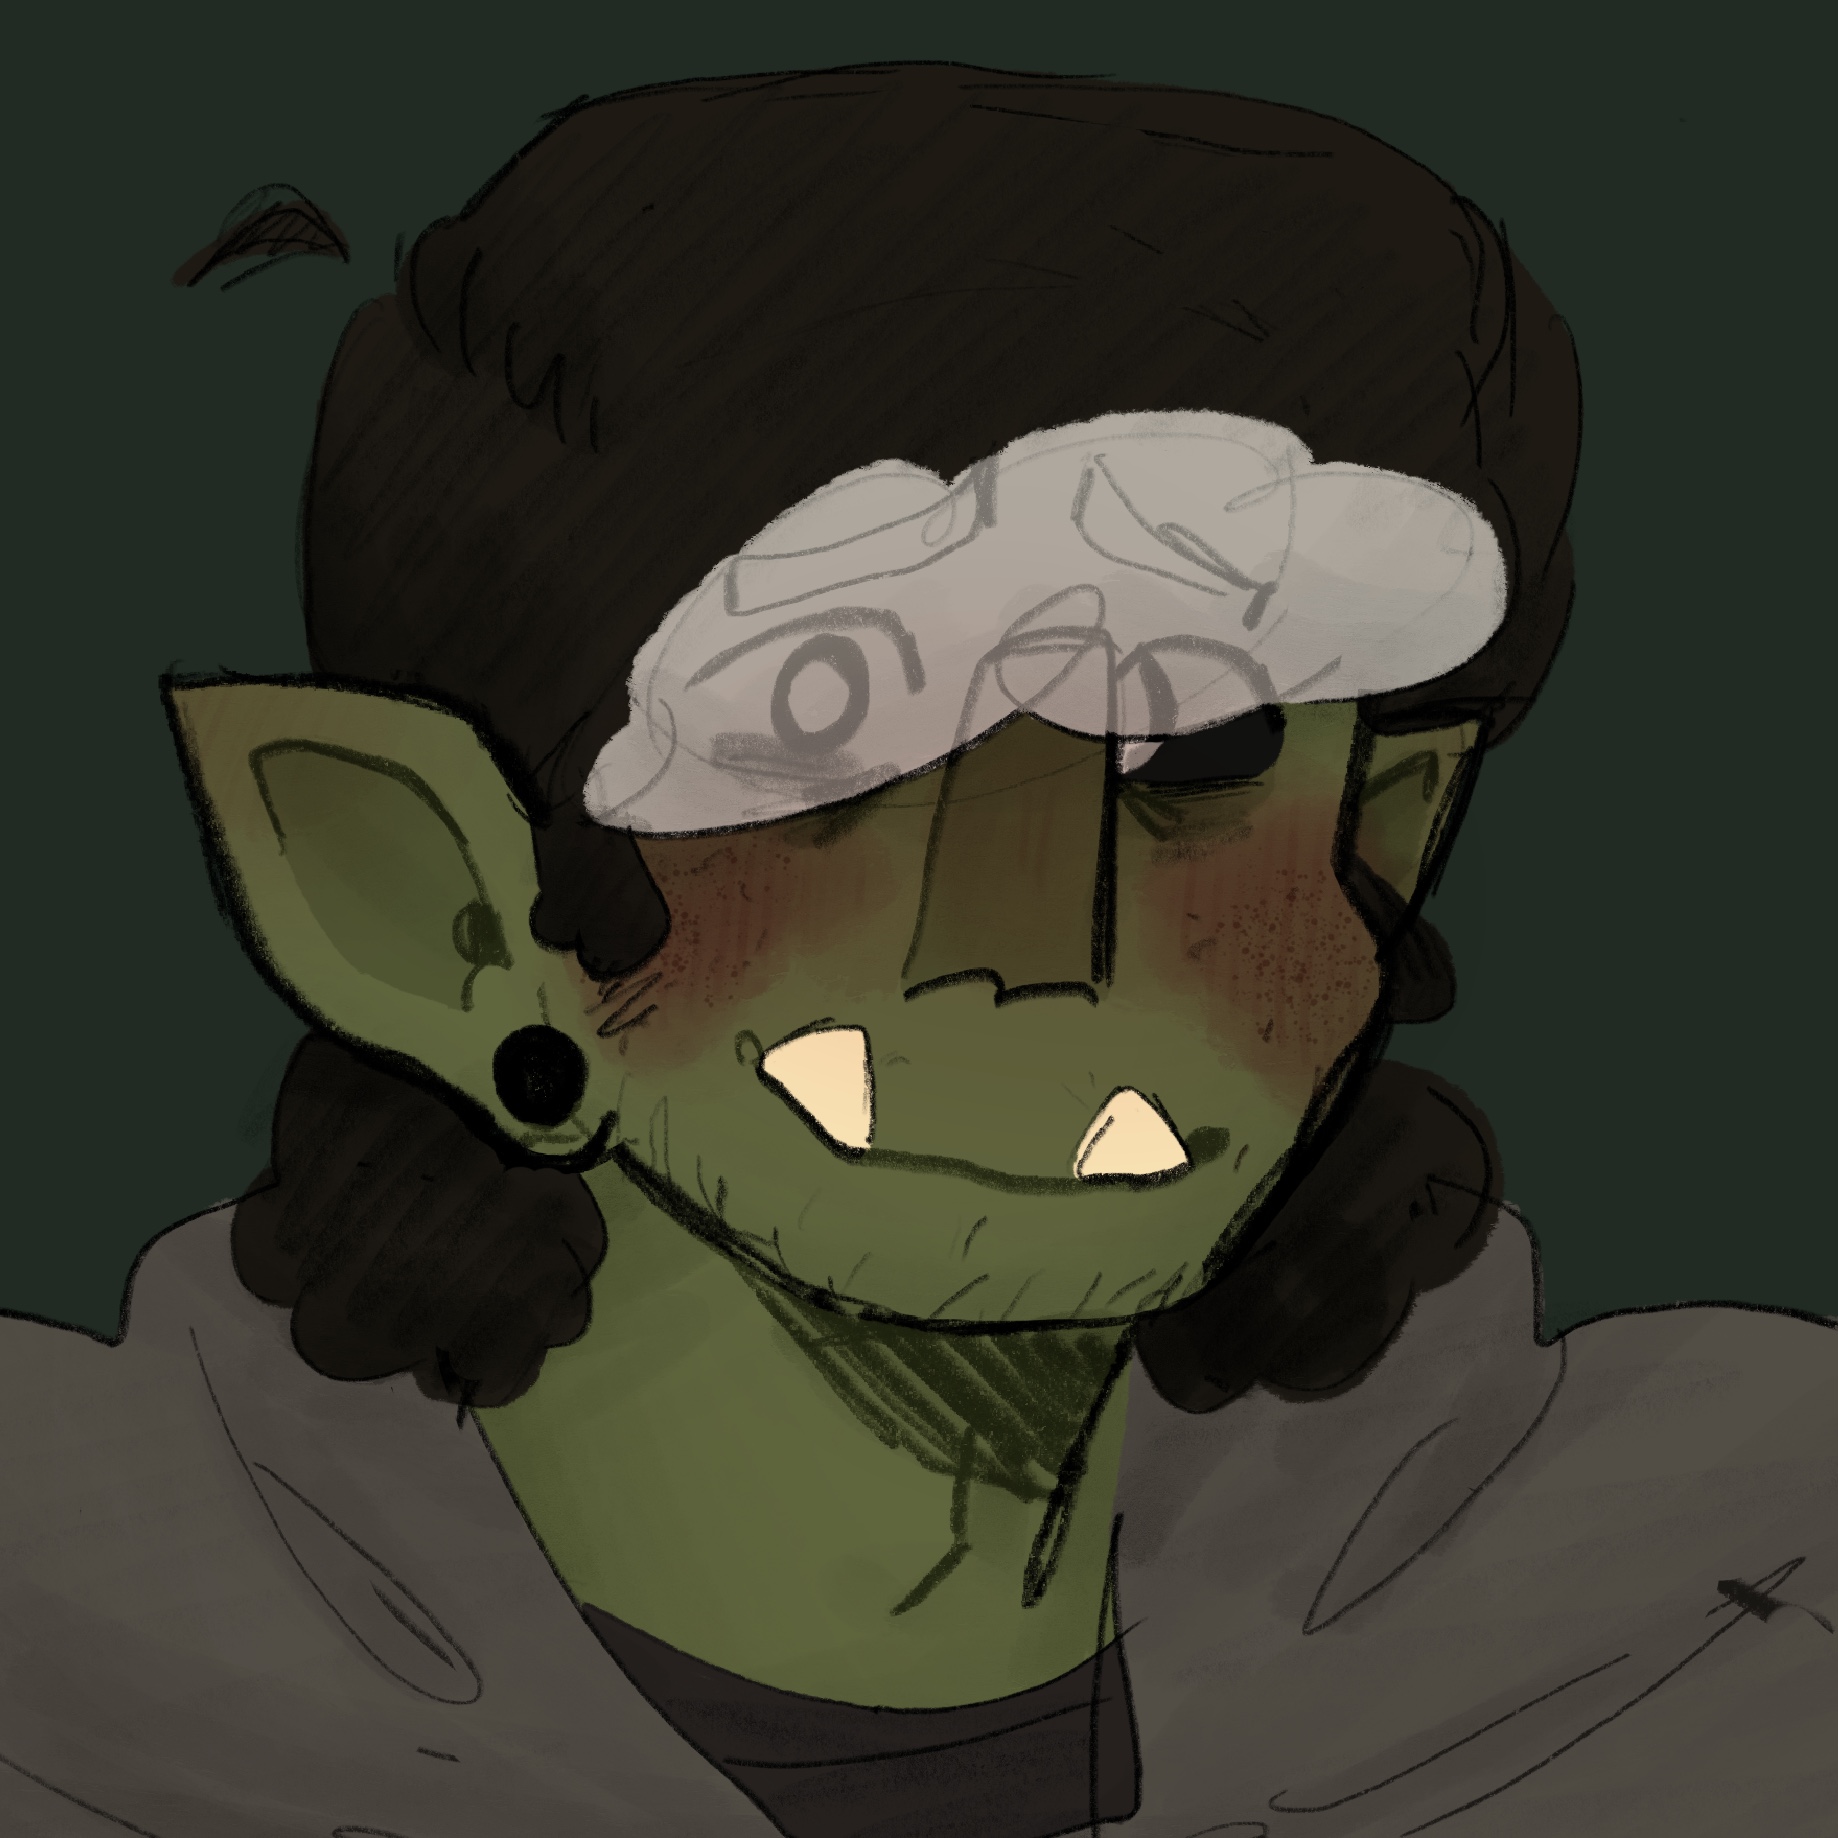 a coloured headshot sketch of gorgug. he is a half-orc with green, pimpled skin, and shoulder-length, shaggy brown hair, and his bangs are white and covering his eyes, which have bags under them. the sclera of his eyes are black, the irises are a light grey, and the pupils are white. due to the art style, you can see the outline of his eyes and thick eyebrows through his bangs. he has a long nose and big, pointy ears that have black, solid gauges in the earlobes. he also has a visible adam’s apple, a strong jaw with a bit of stubble on it, and has two large, yellowed teeth poking up out of his smiling mouth. he is wearing a grey pull-over hoodie over a black t-shirt, and he is looking at the viewer with a nervous, closed-mouthed smile.